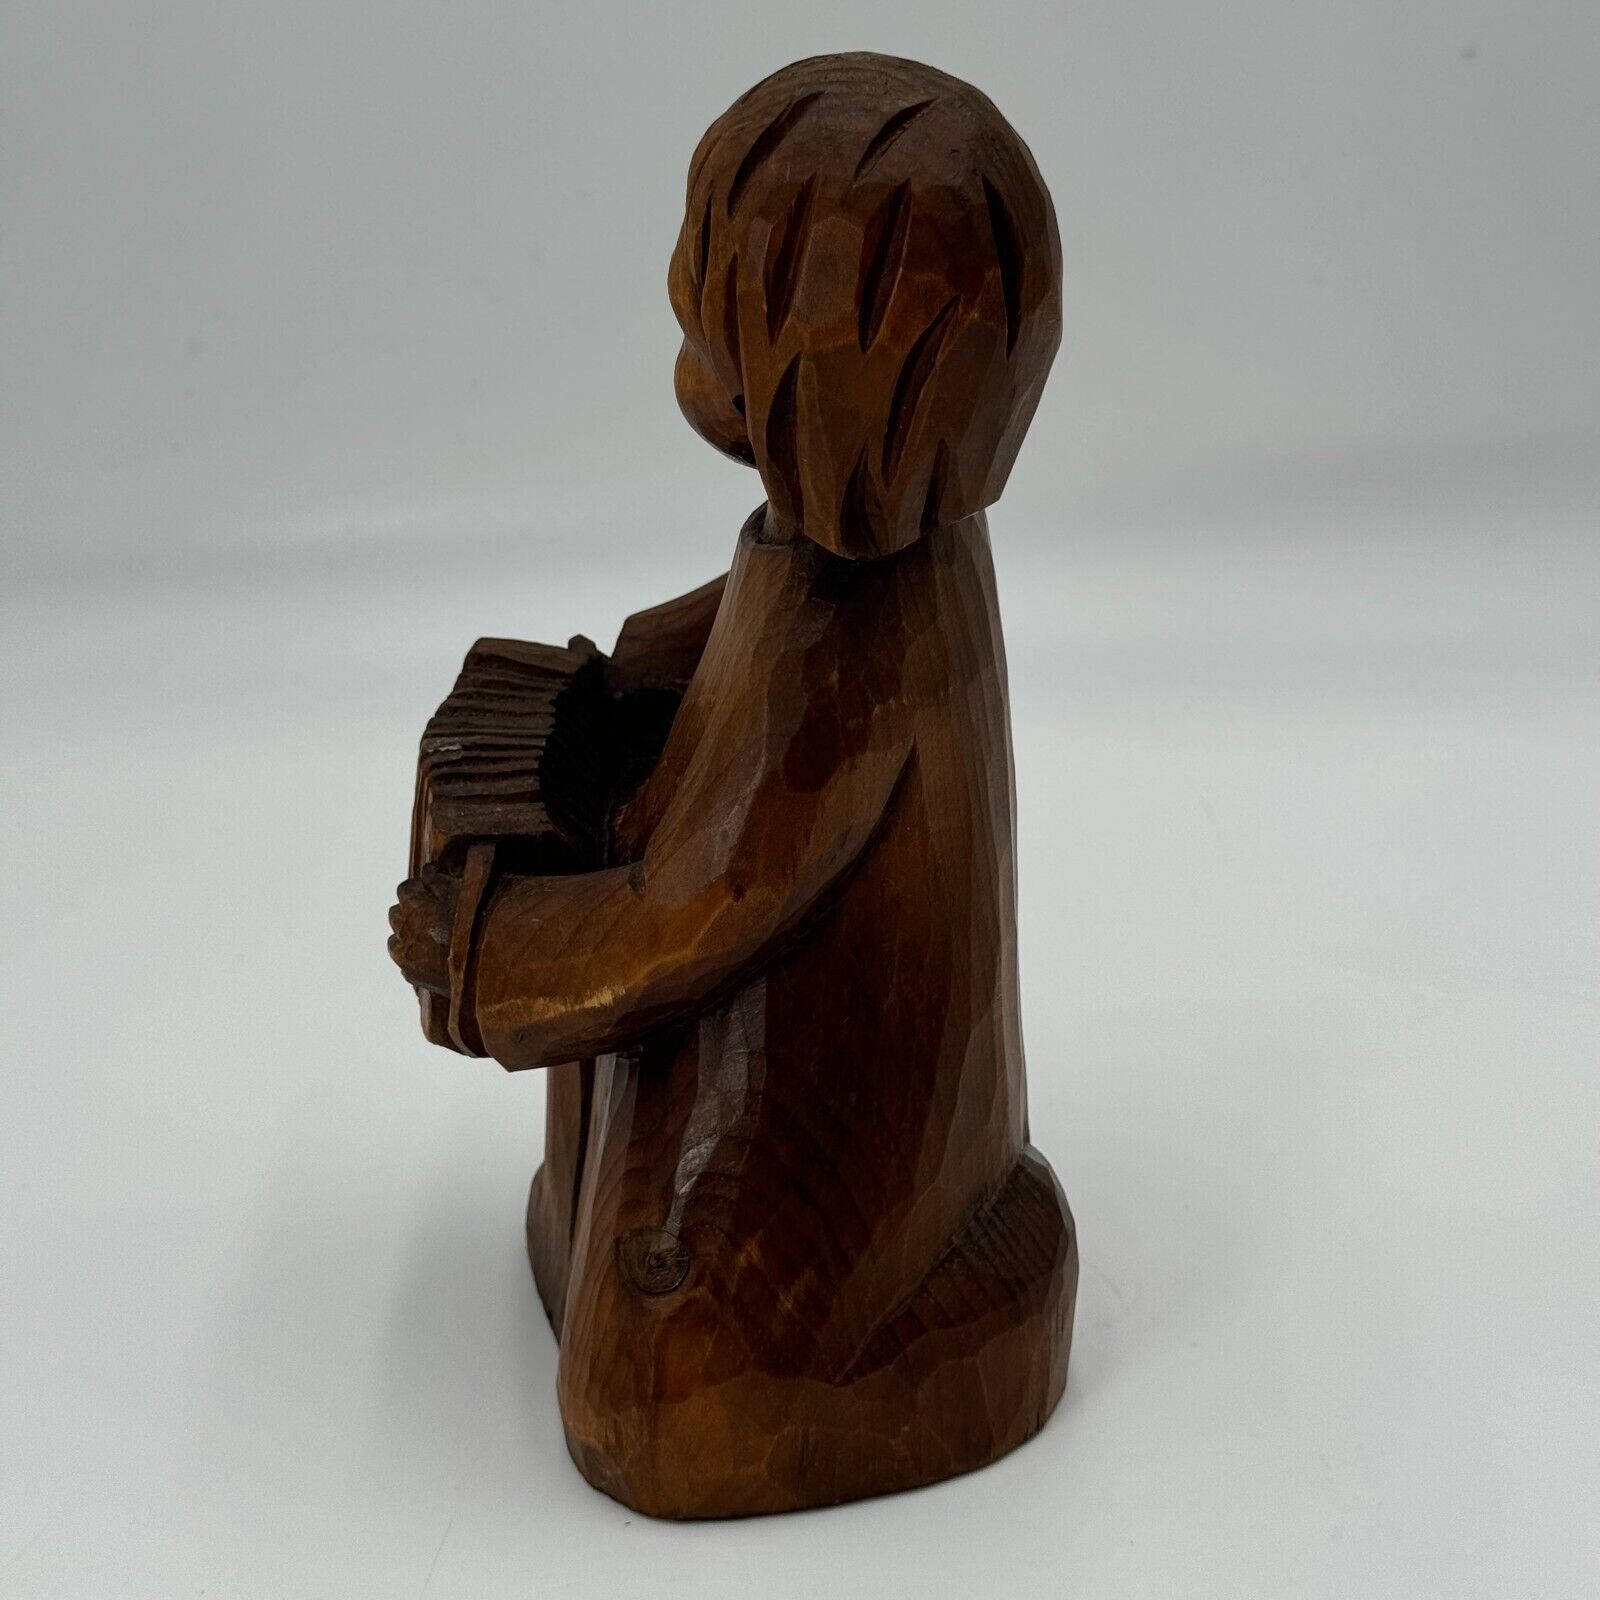 Antique Solid Wood Sculpture Hand Carved Statue Art Boy Playing Accordion Artist